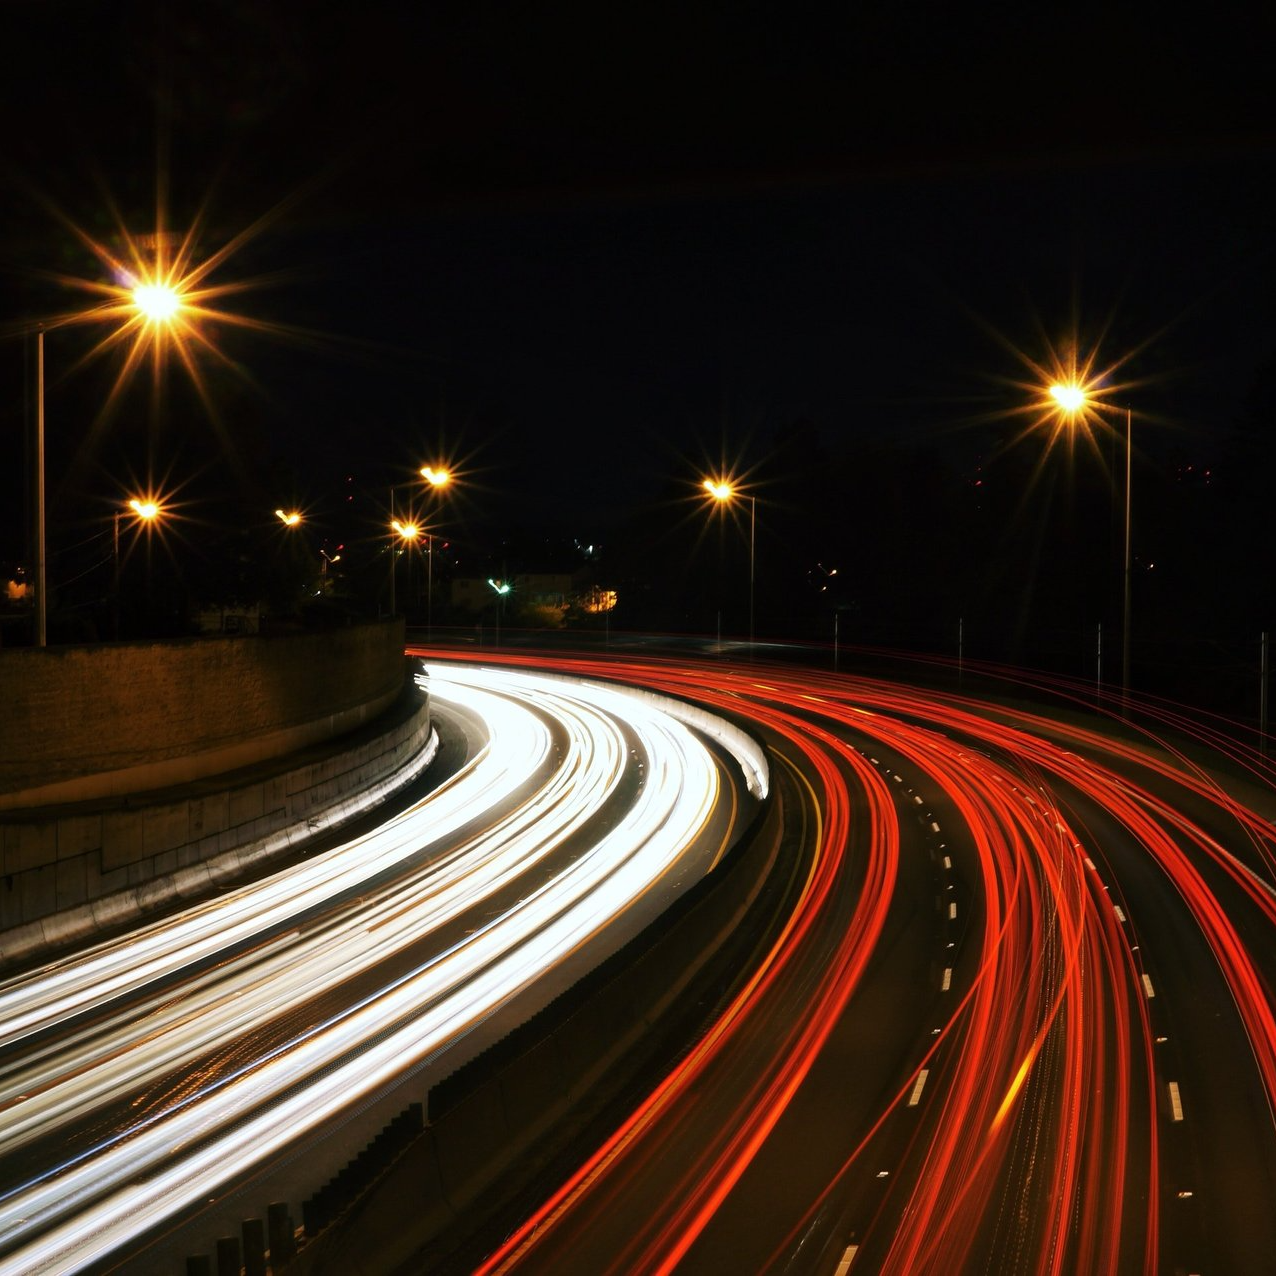 Photograph of a time lapse of a busy motorway at night. White and Red lights